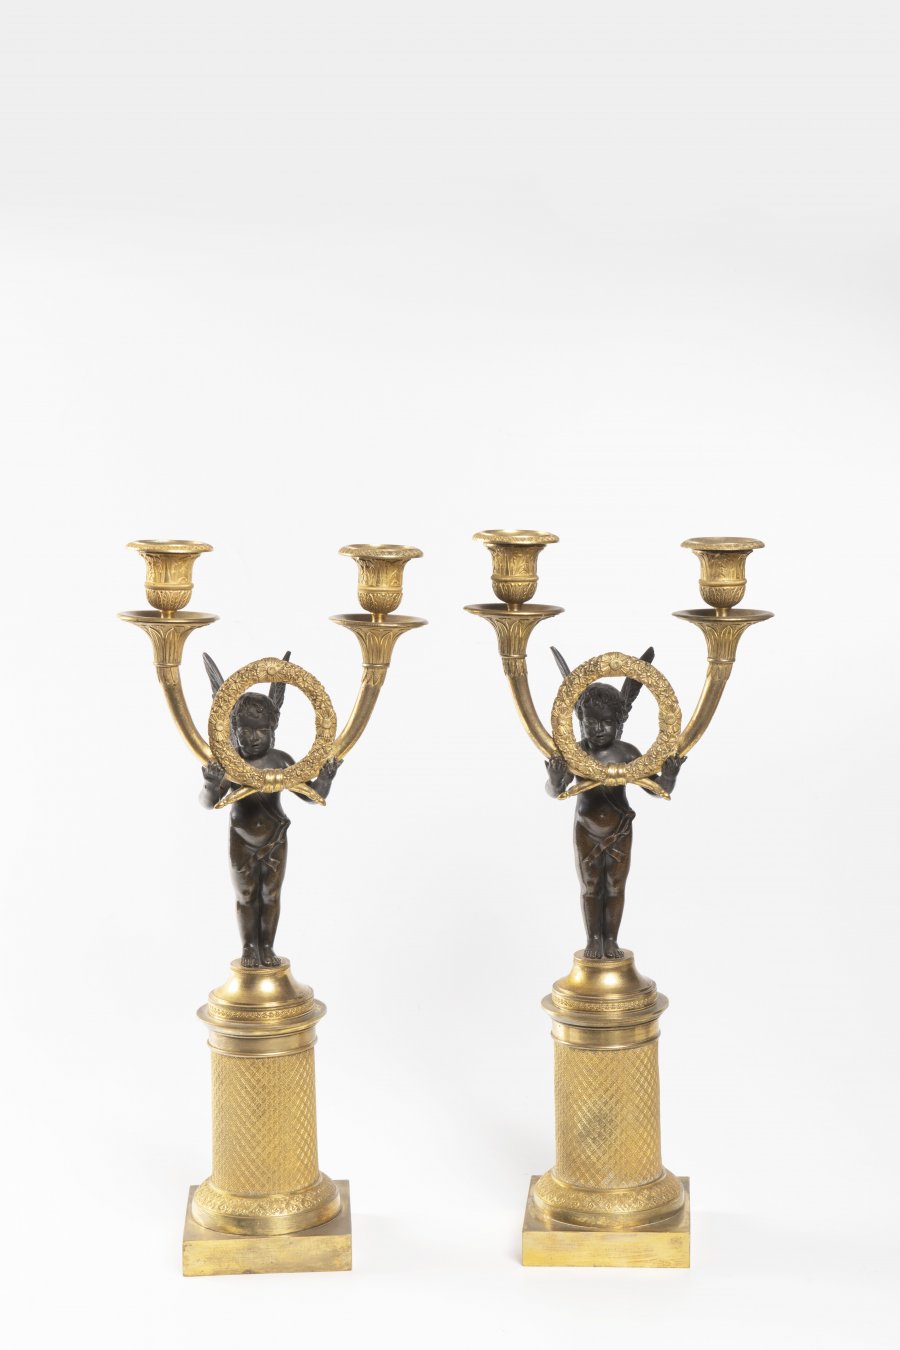 PAIRED EMPIRE CANDLESTICKS